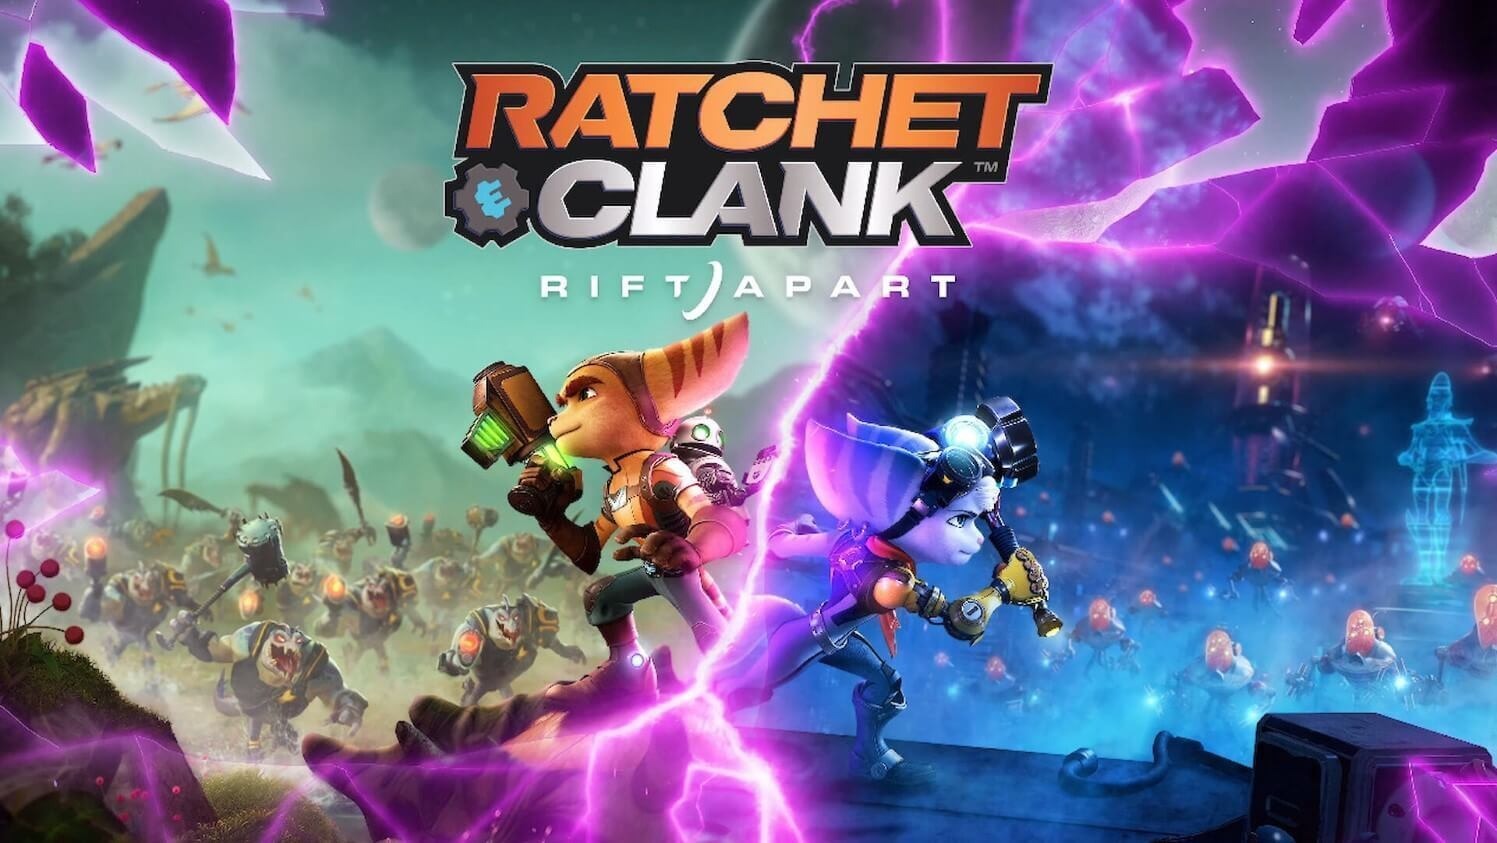 Ratchet & Clank: Rift Apart is heading to PC on July 26th - The Verge